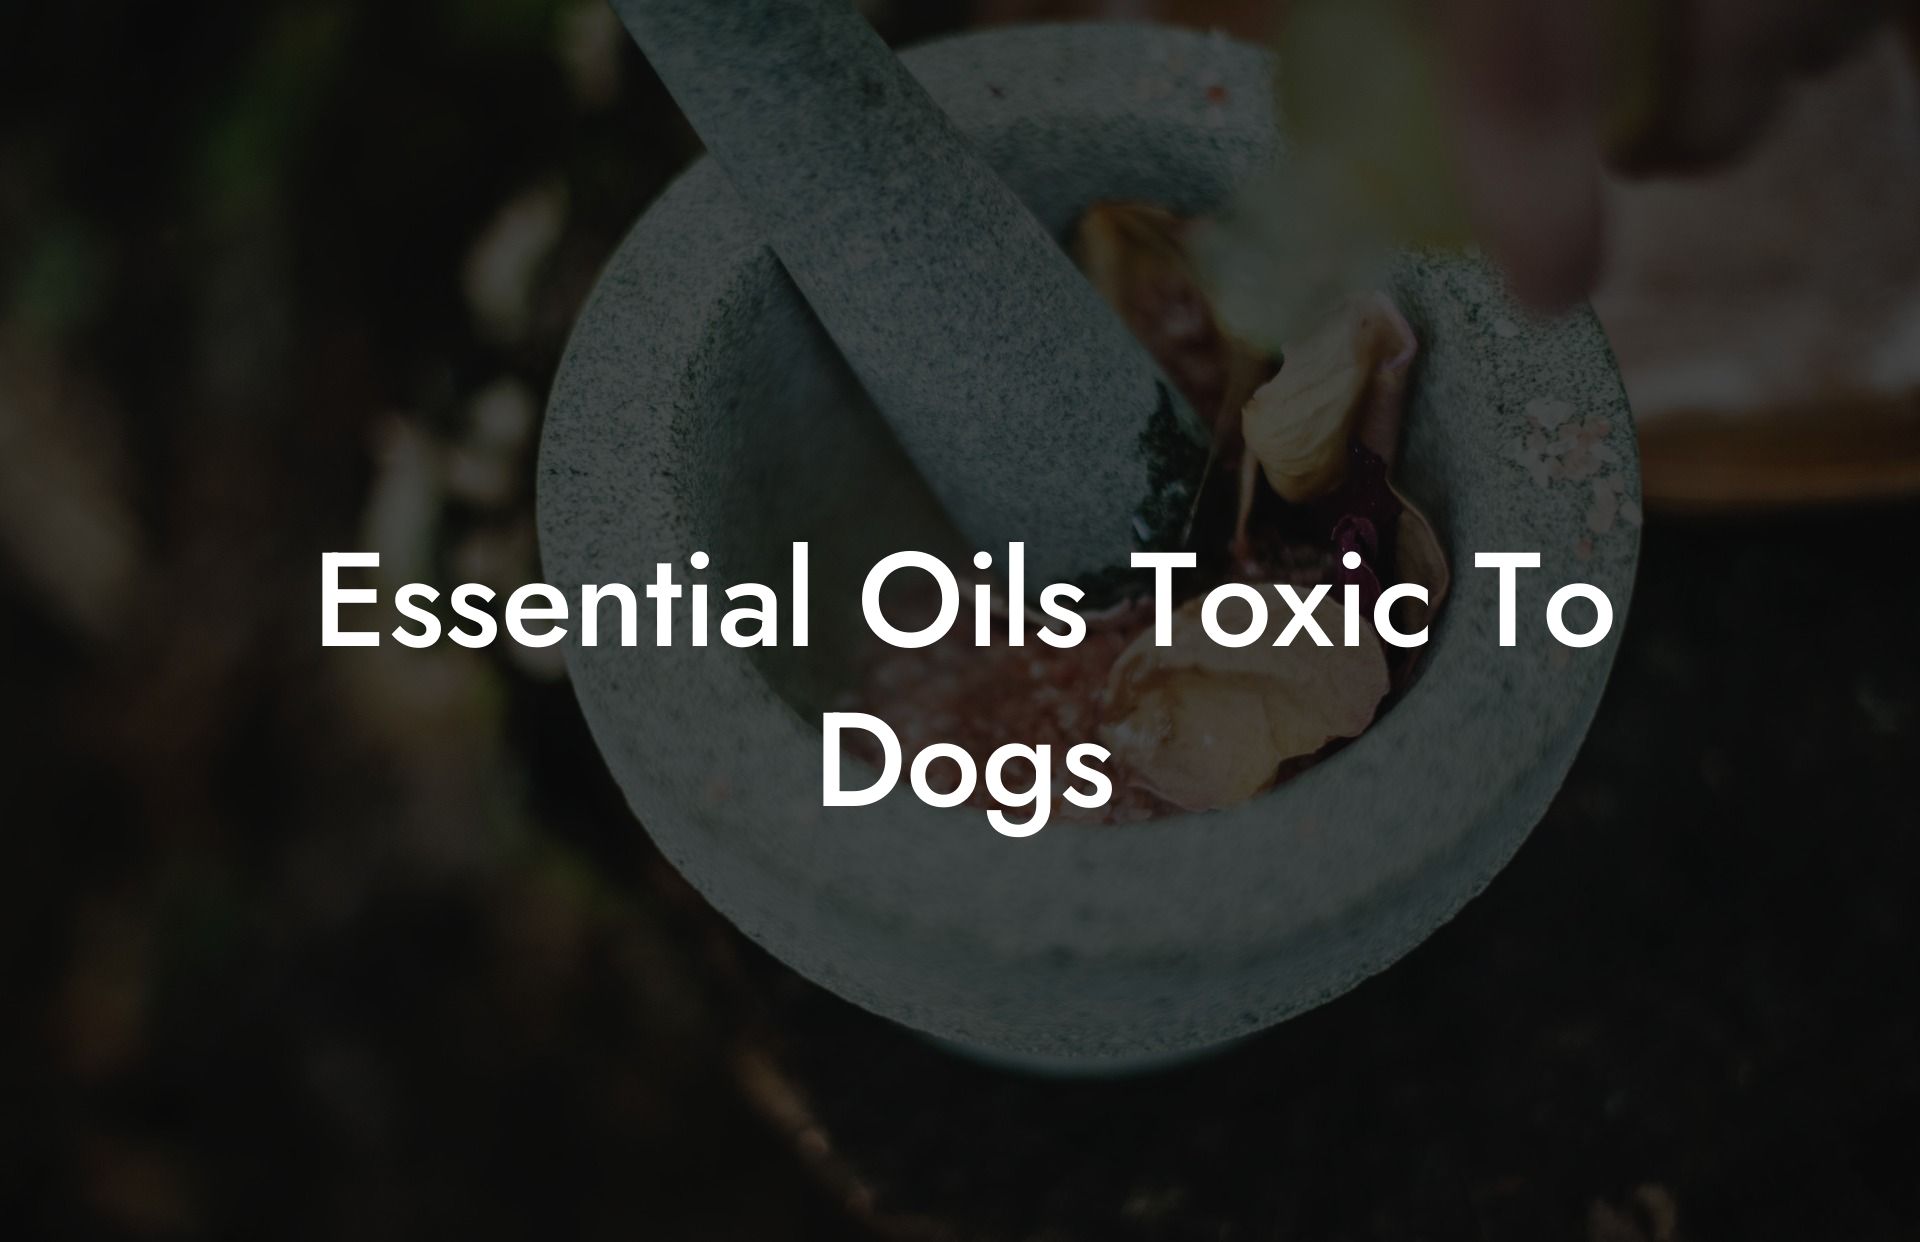 Essential Oils Toxic To Dogs